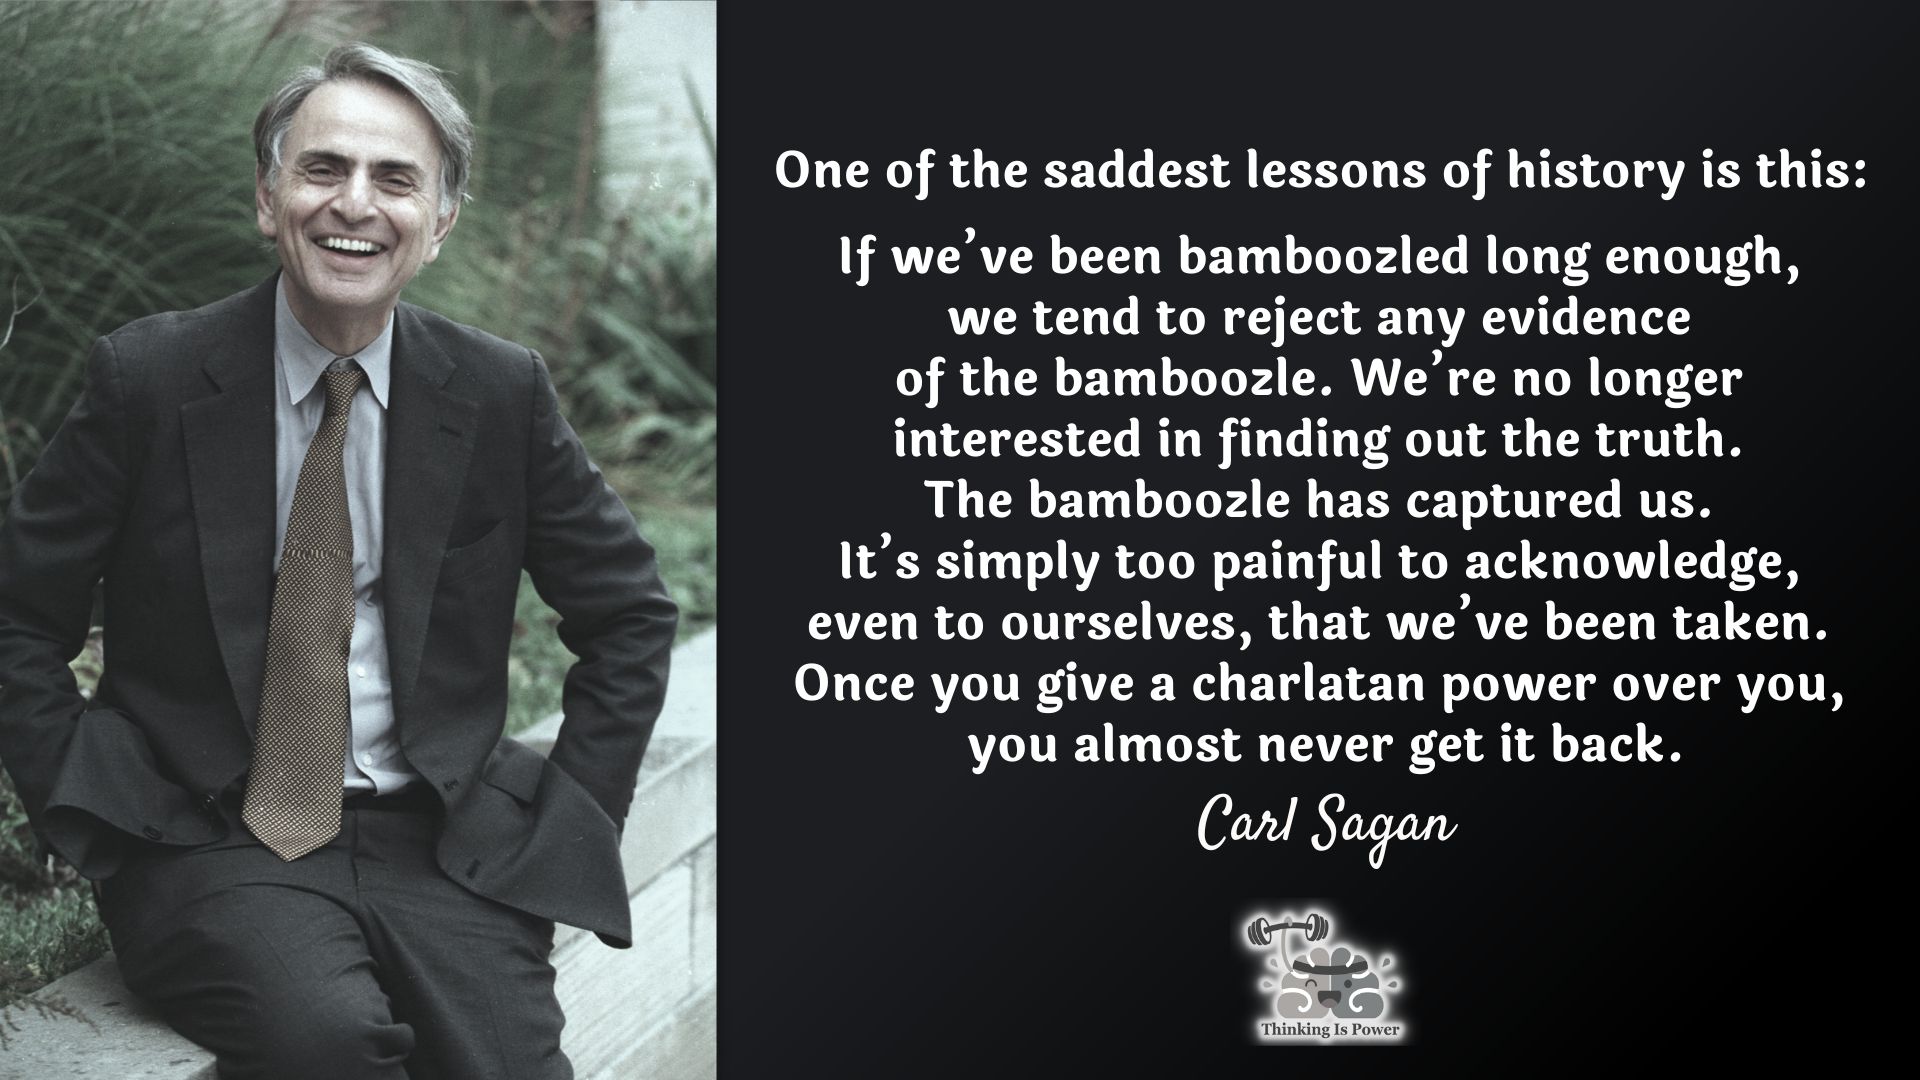 Carl Sagan Quote One of the saddest lessons of history is this: if we've been bamboozled long enough, we tend to reject any evidence of the bamboozle. We're no longer interested in finding out he truth. The bamboozle has captured us. It's simply too painful to acknowledge, even to ourselves, that we've been taken. Once you give a charlatan power over you, you almost never get it back.